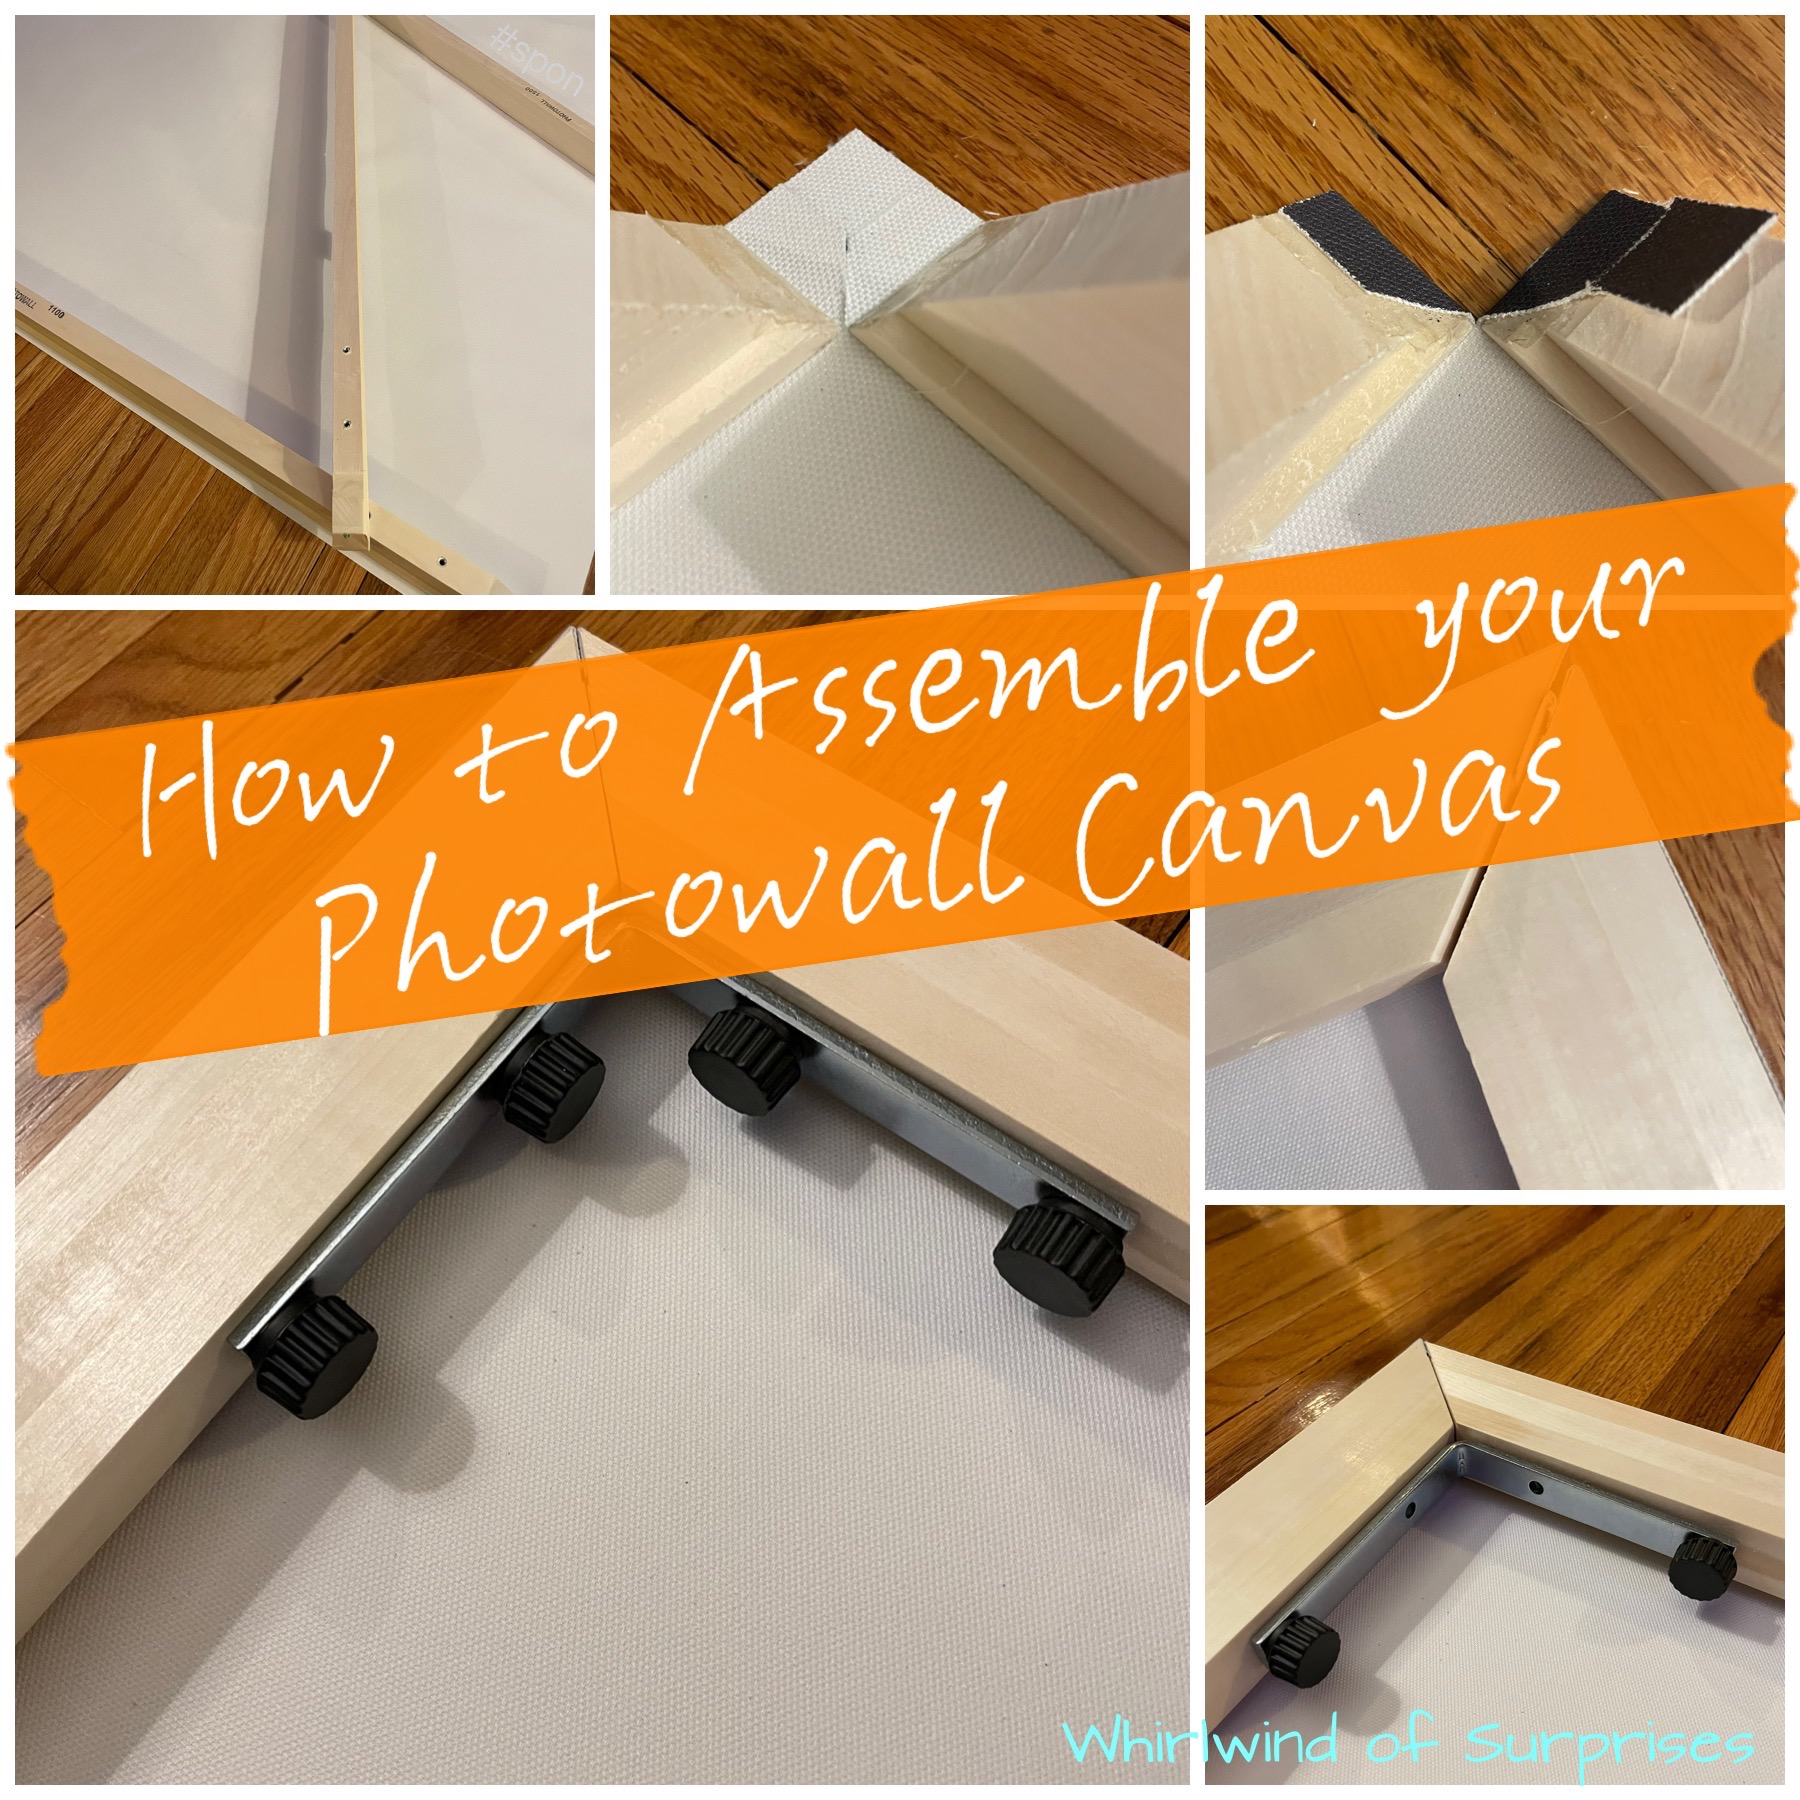 How to Assemble a Photowall Canvas